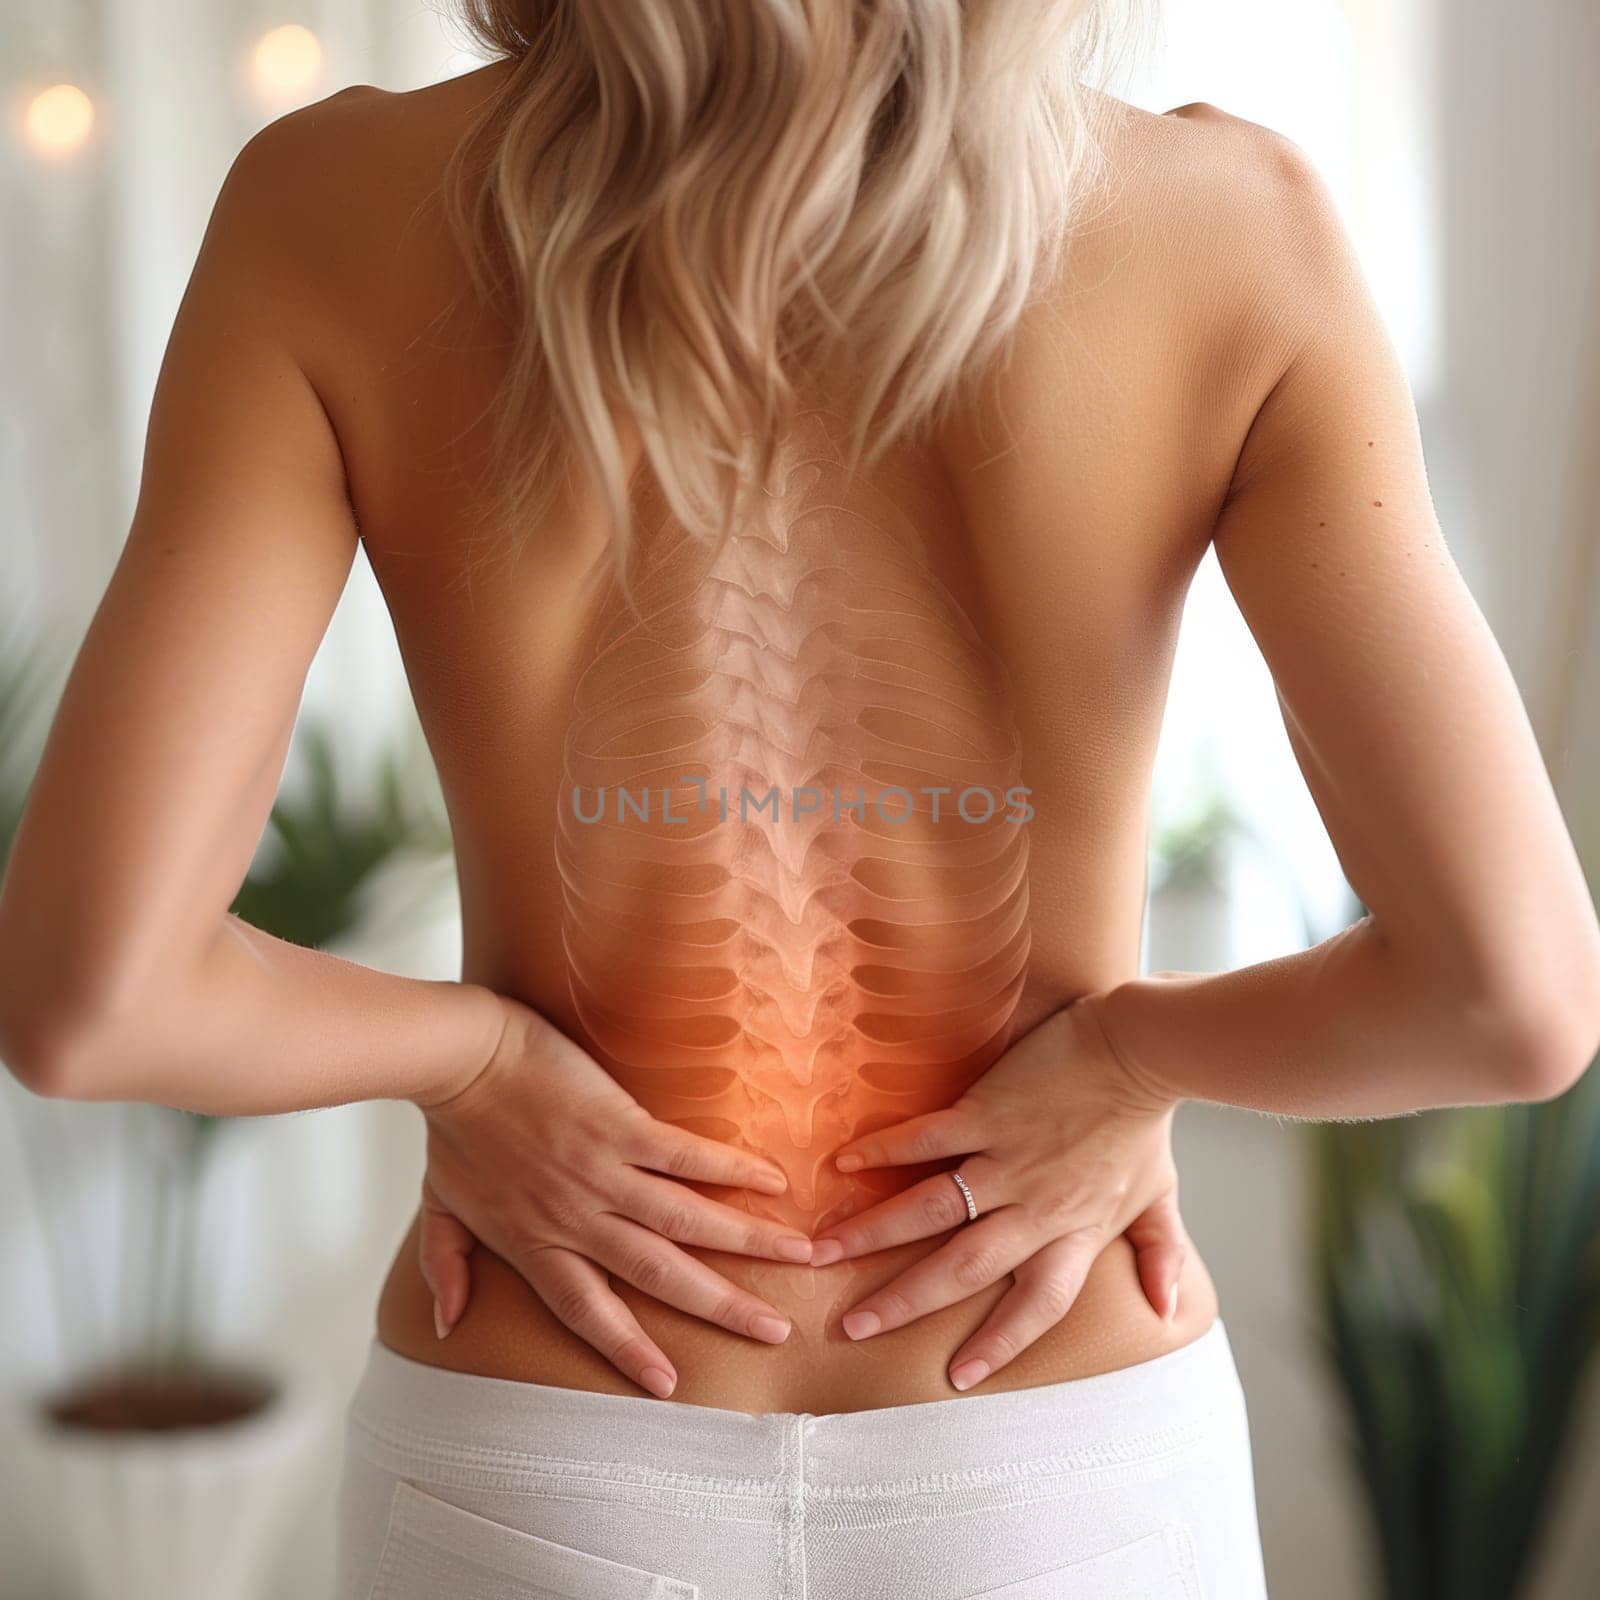 Back view of a woman with a backache and pain is shown with her hands on her back.